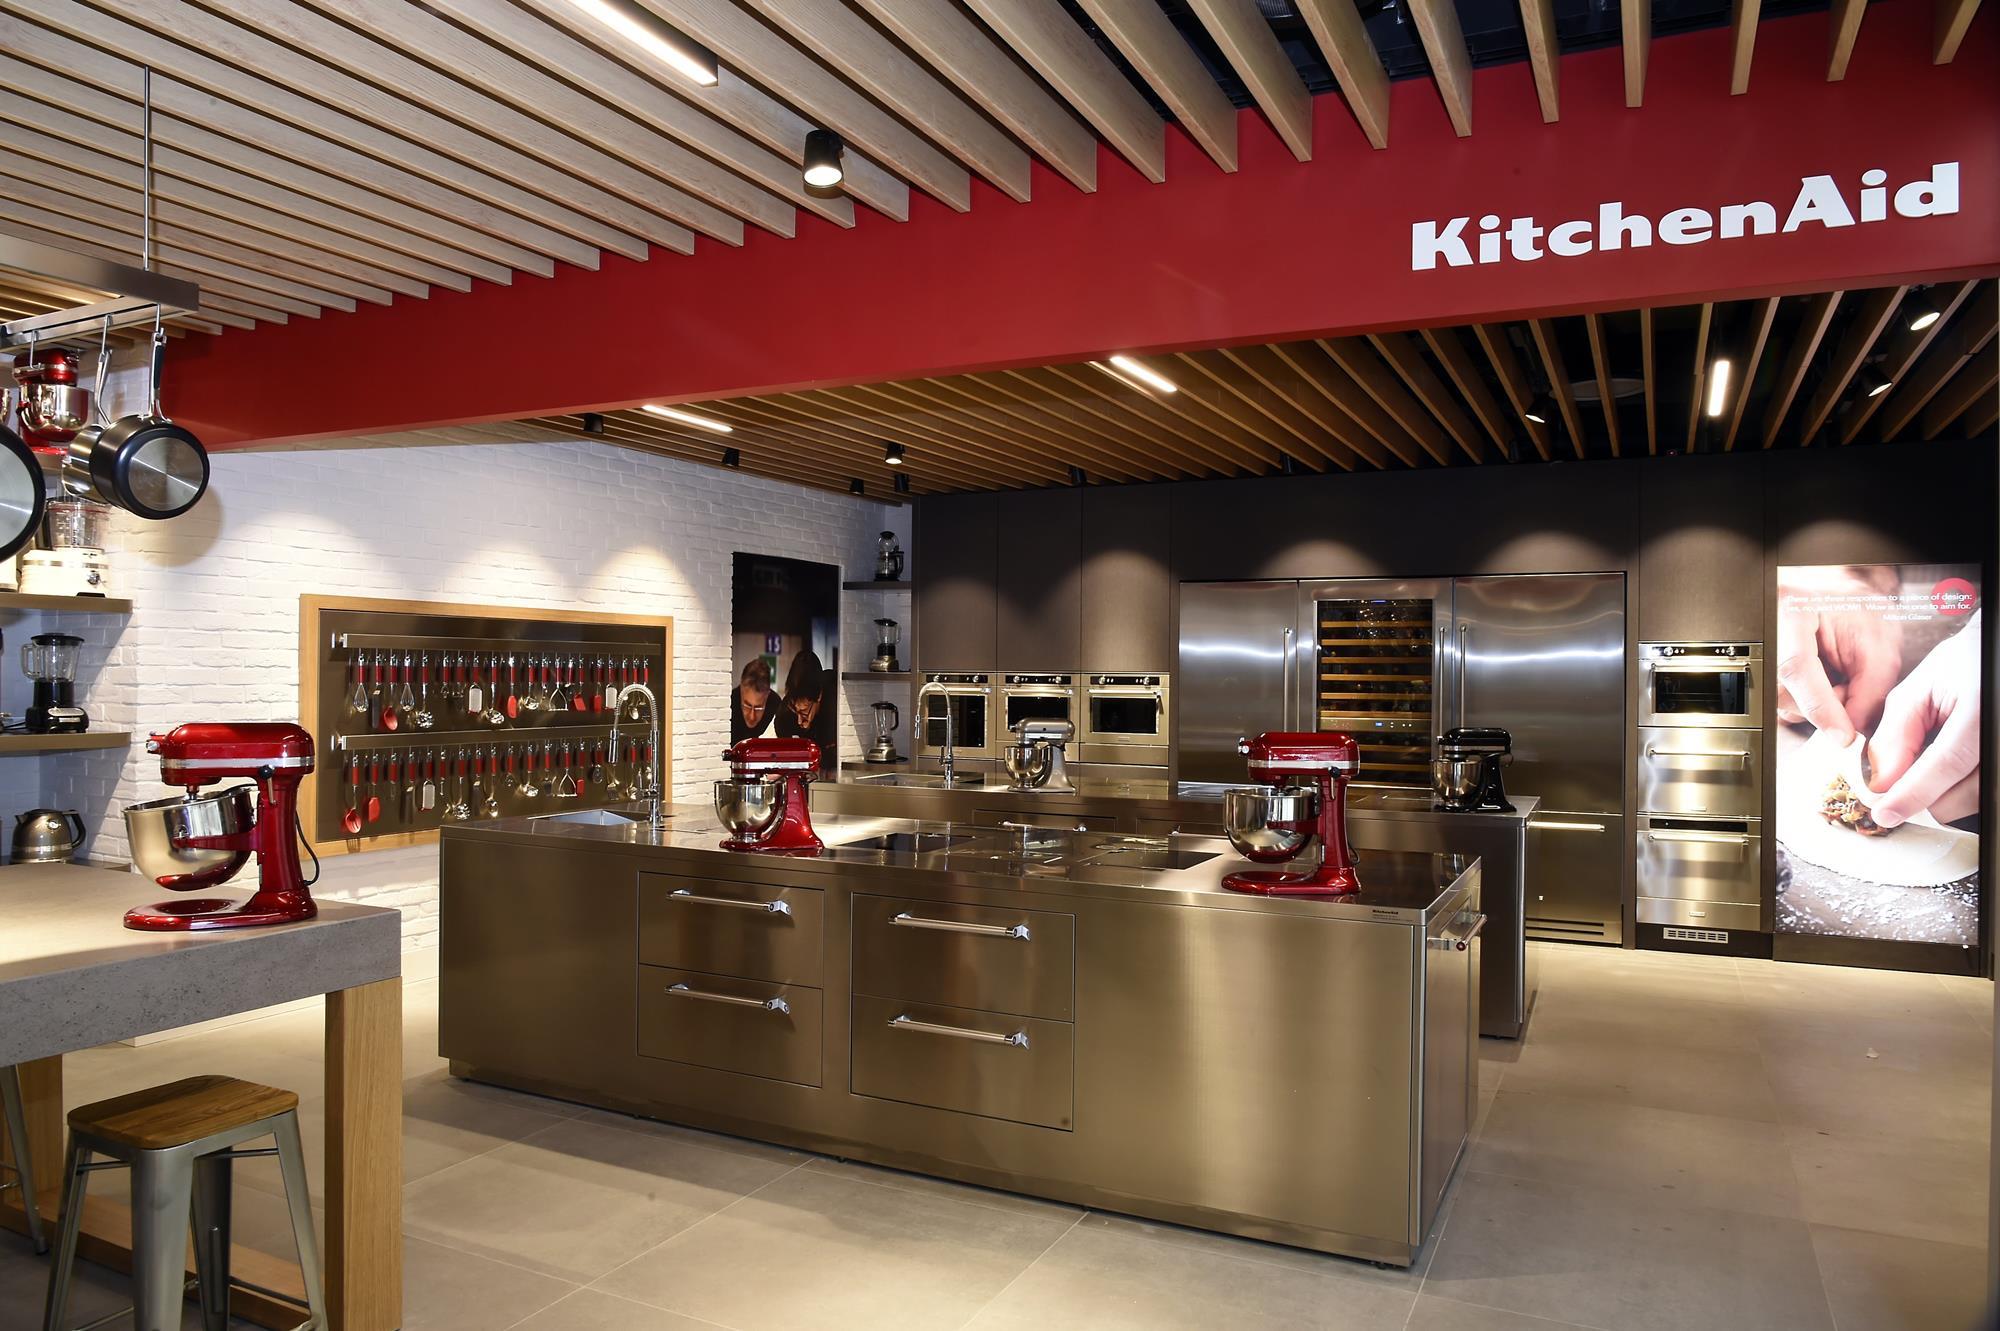 3028573 KitchenAid Products Are On Display In The Basement Level 